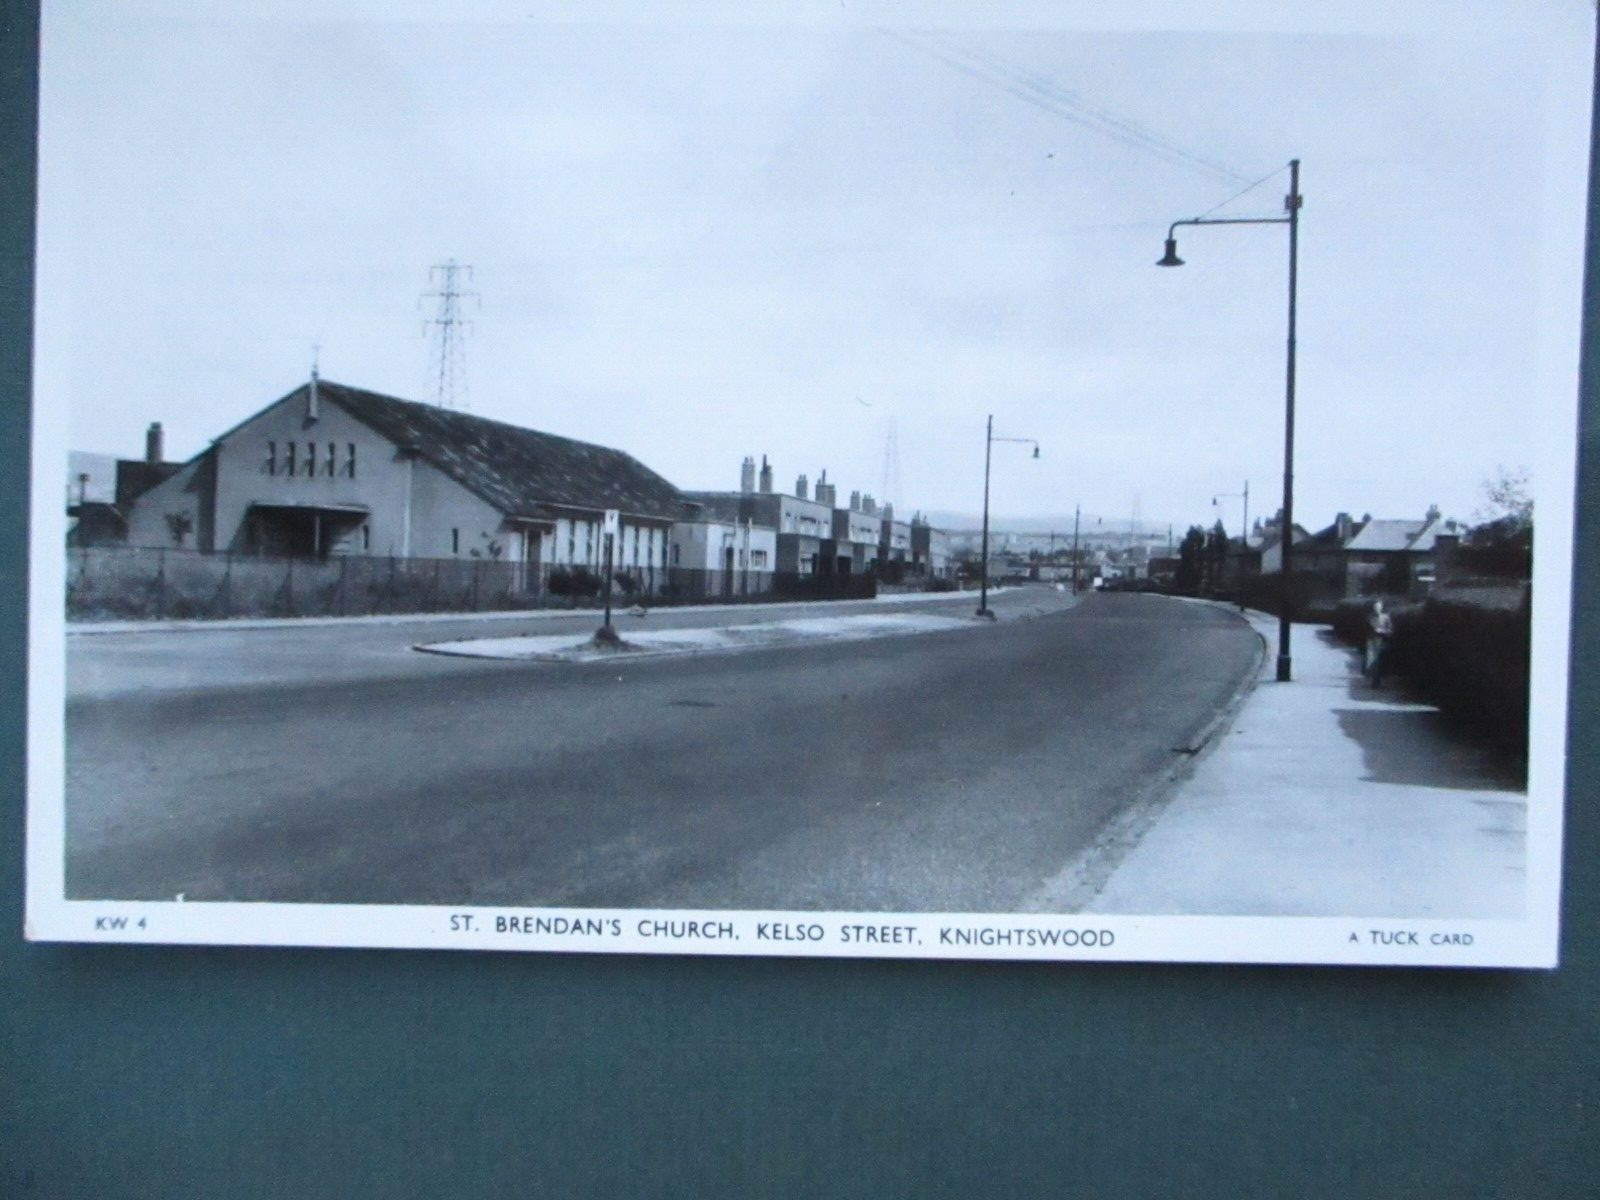 House Clearance - GLASGOW, KNIGHTSWOOD, KELSO ST. ST BRENDAN'S CHURCH, CIRCA 1960, R/P